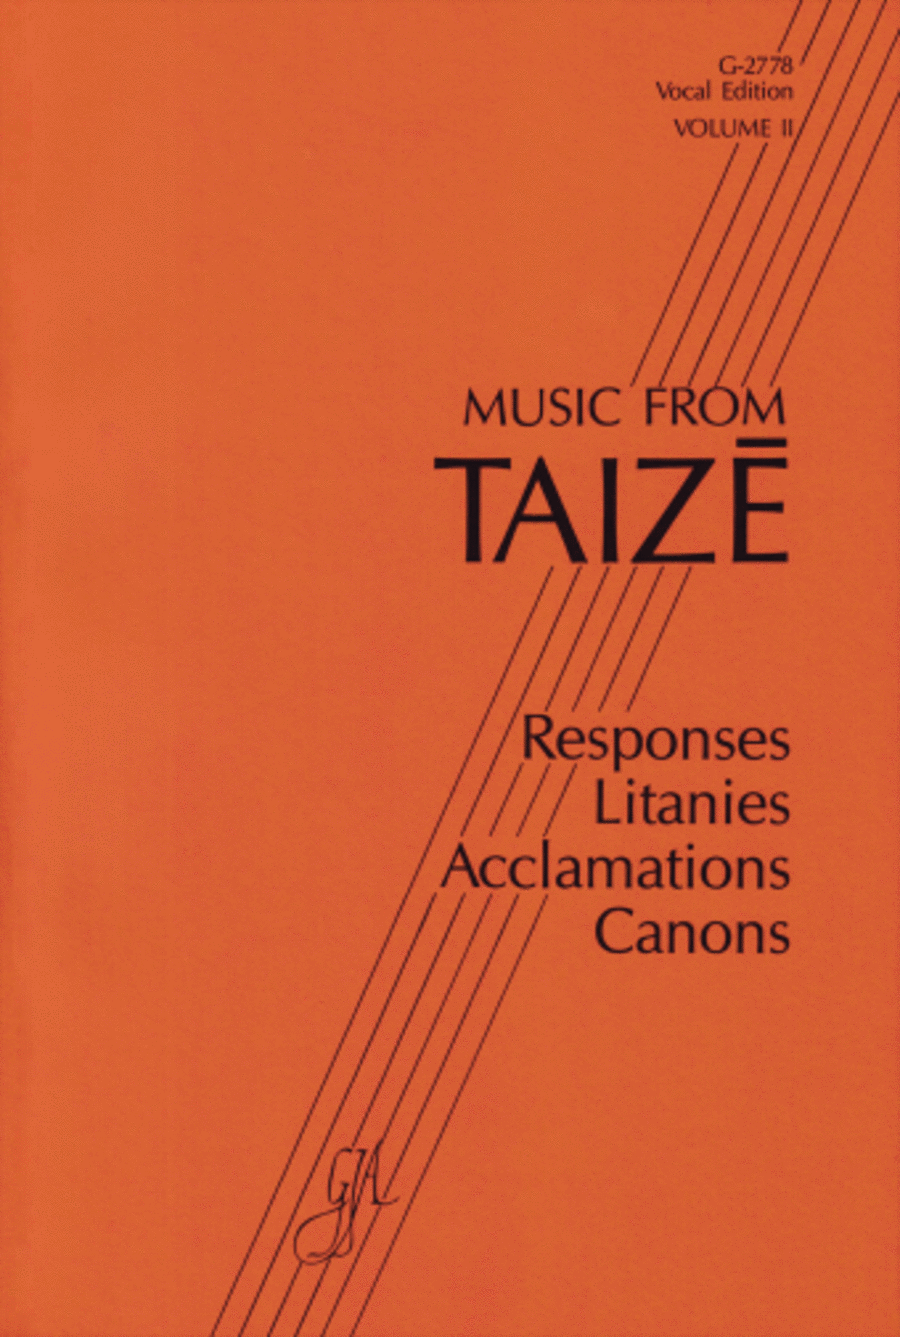 Music from Taize - Volume II People